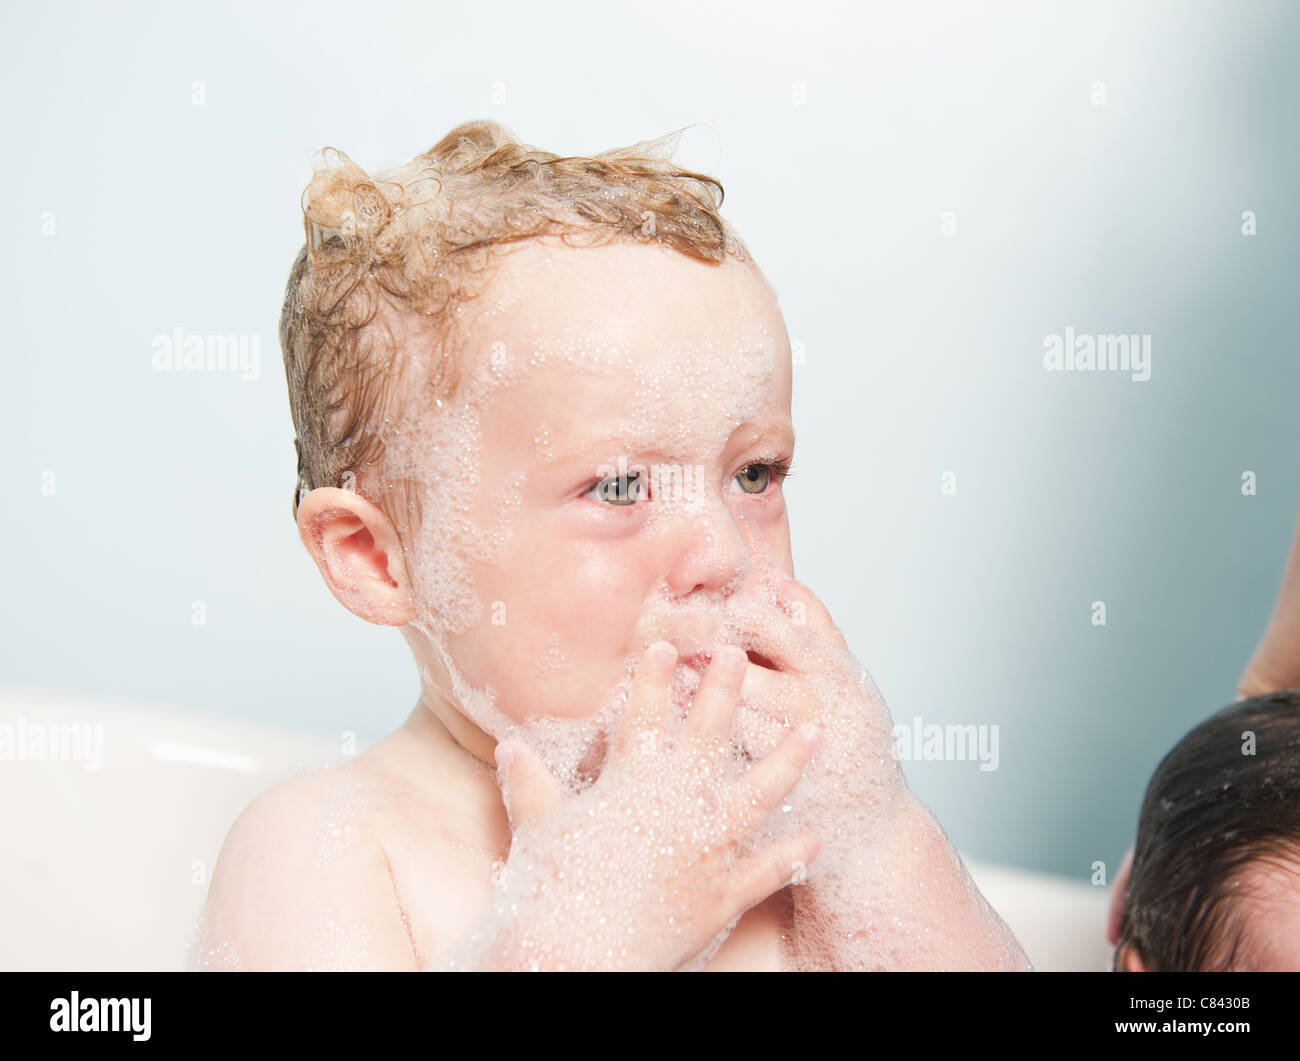 Toddler crying in bubble bath Stock Photo